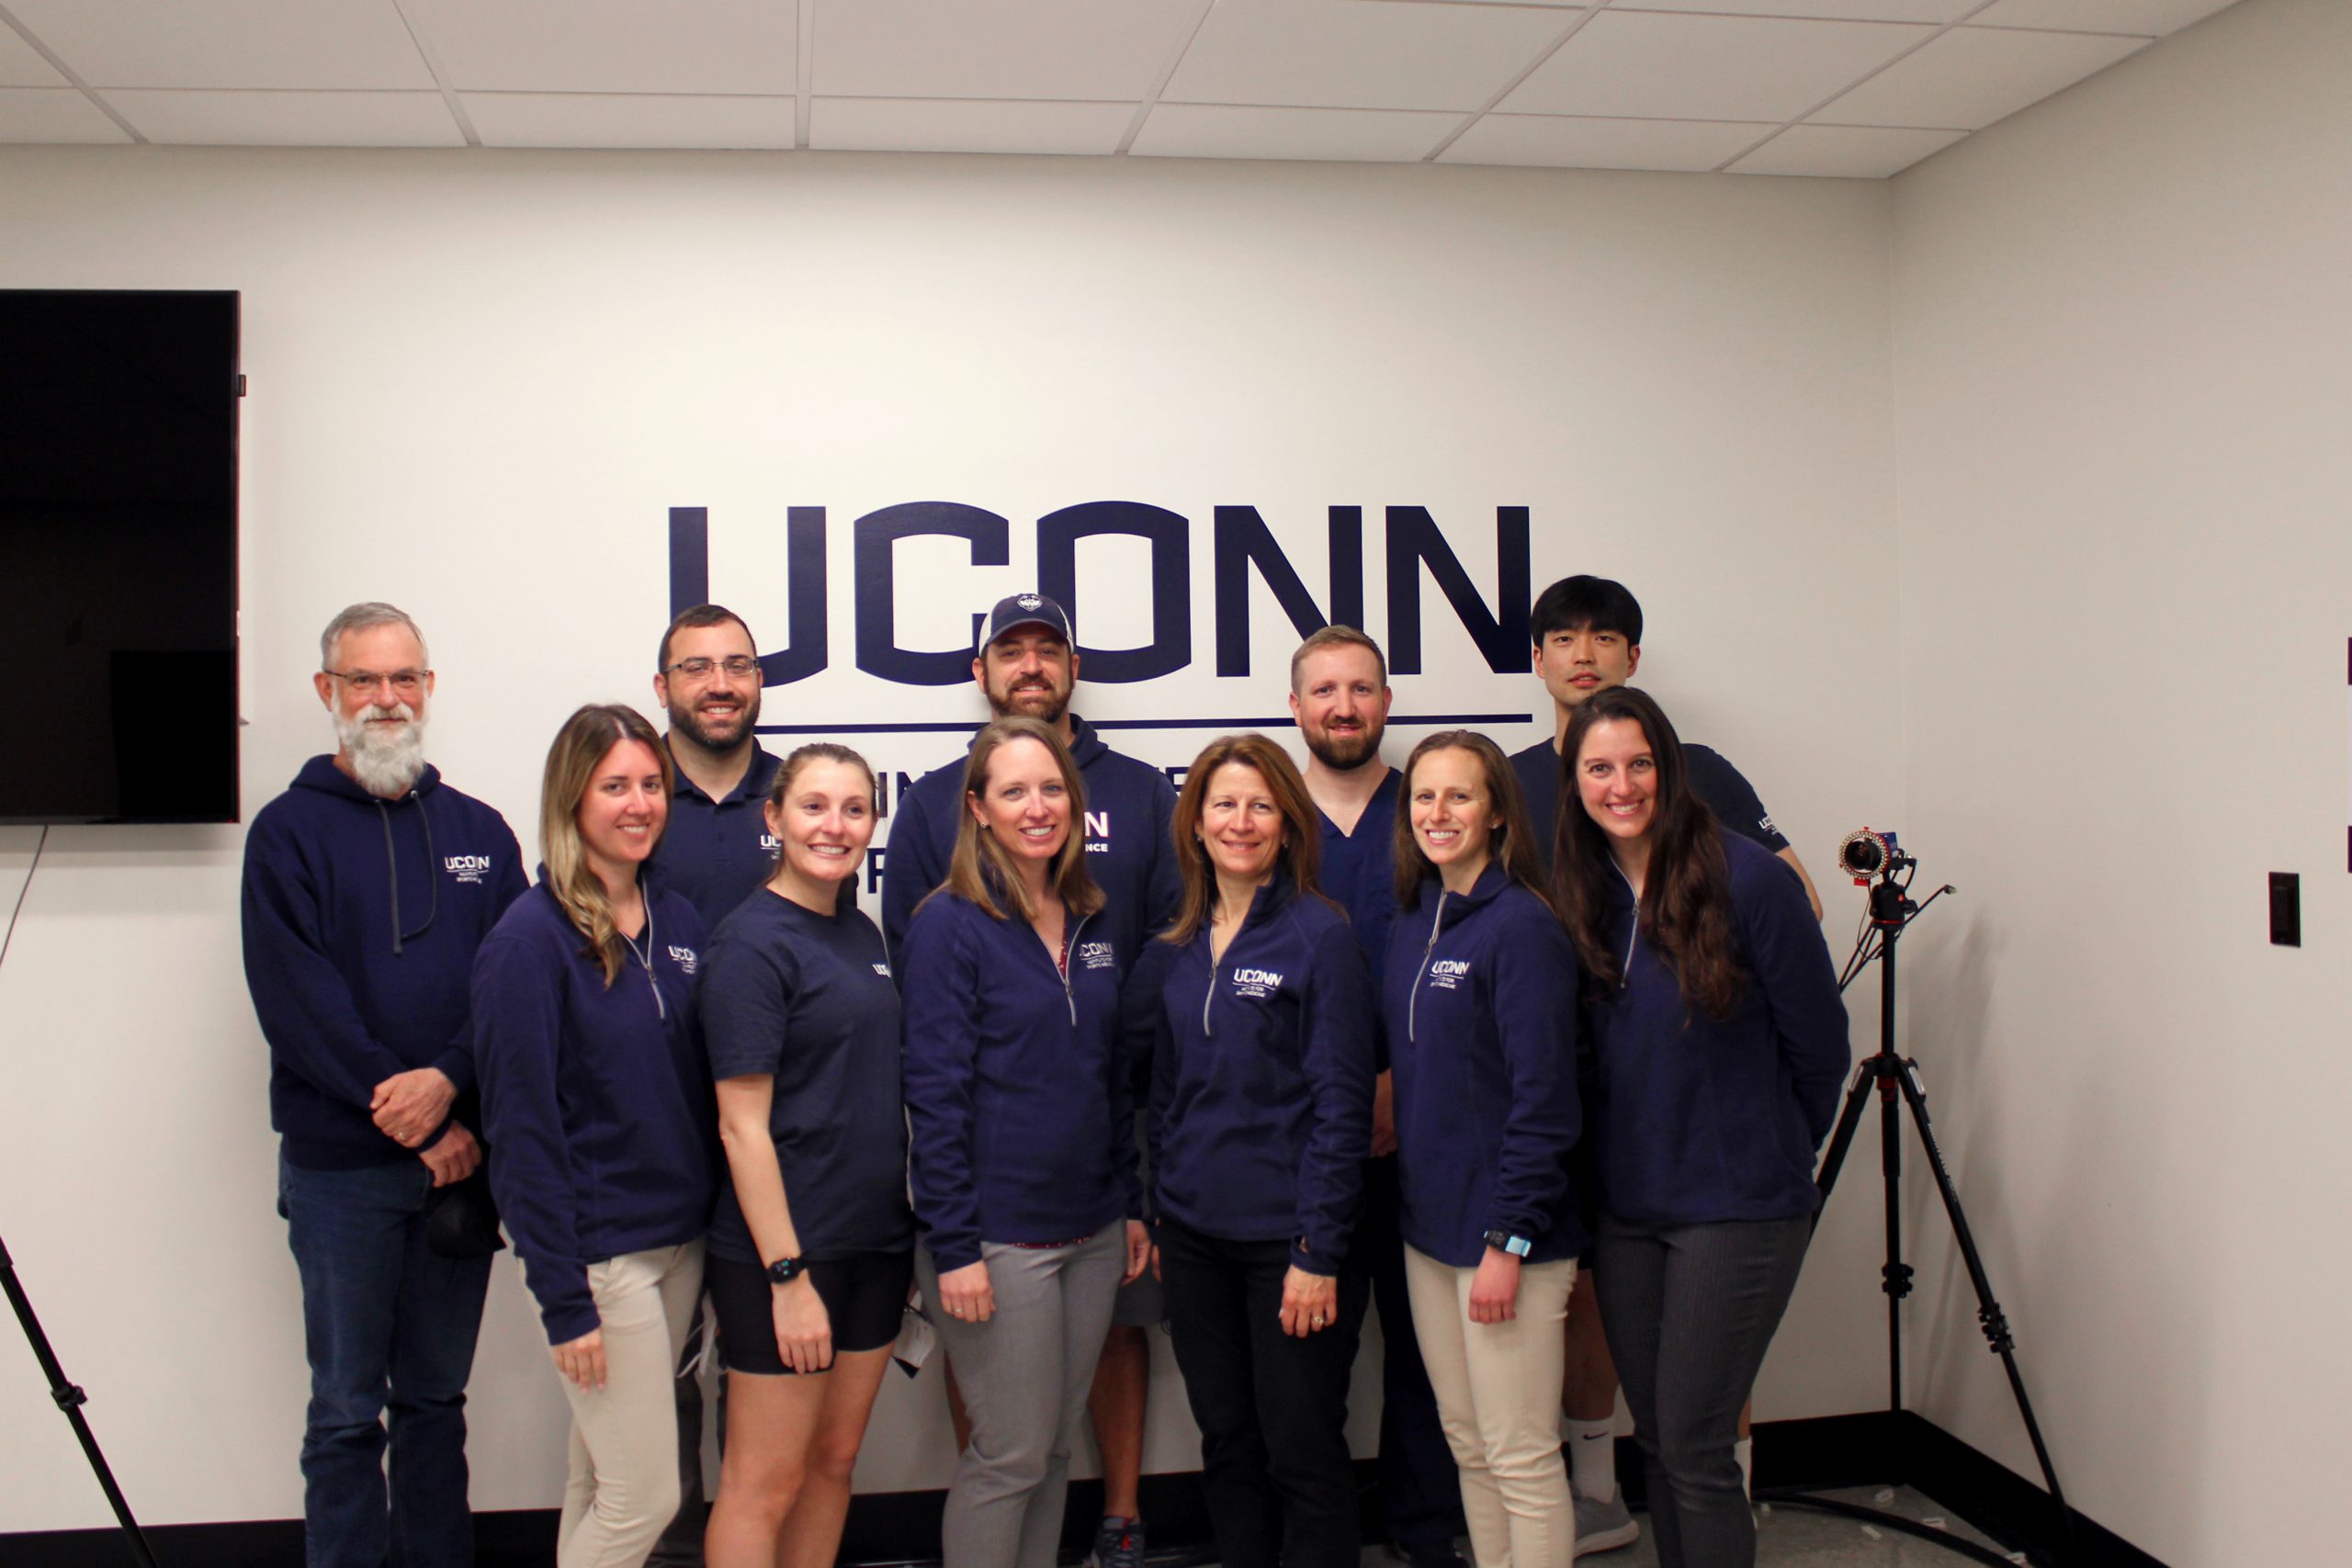 Some of the UConn ISM Team